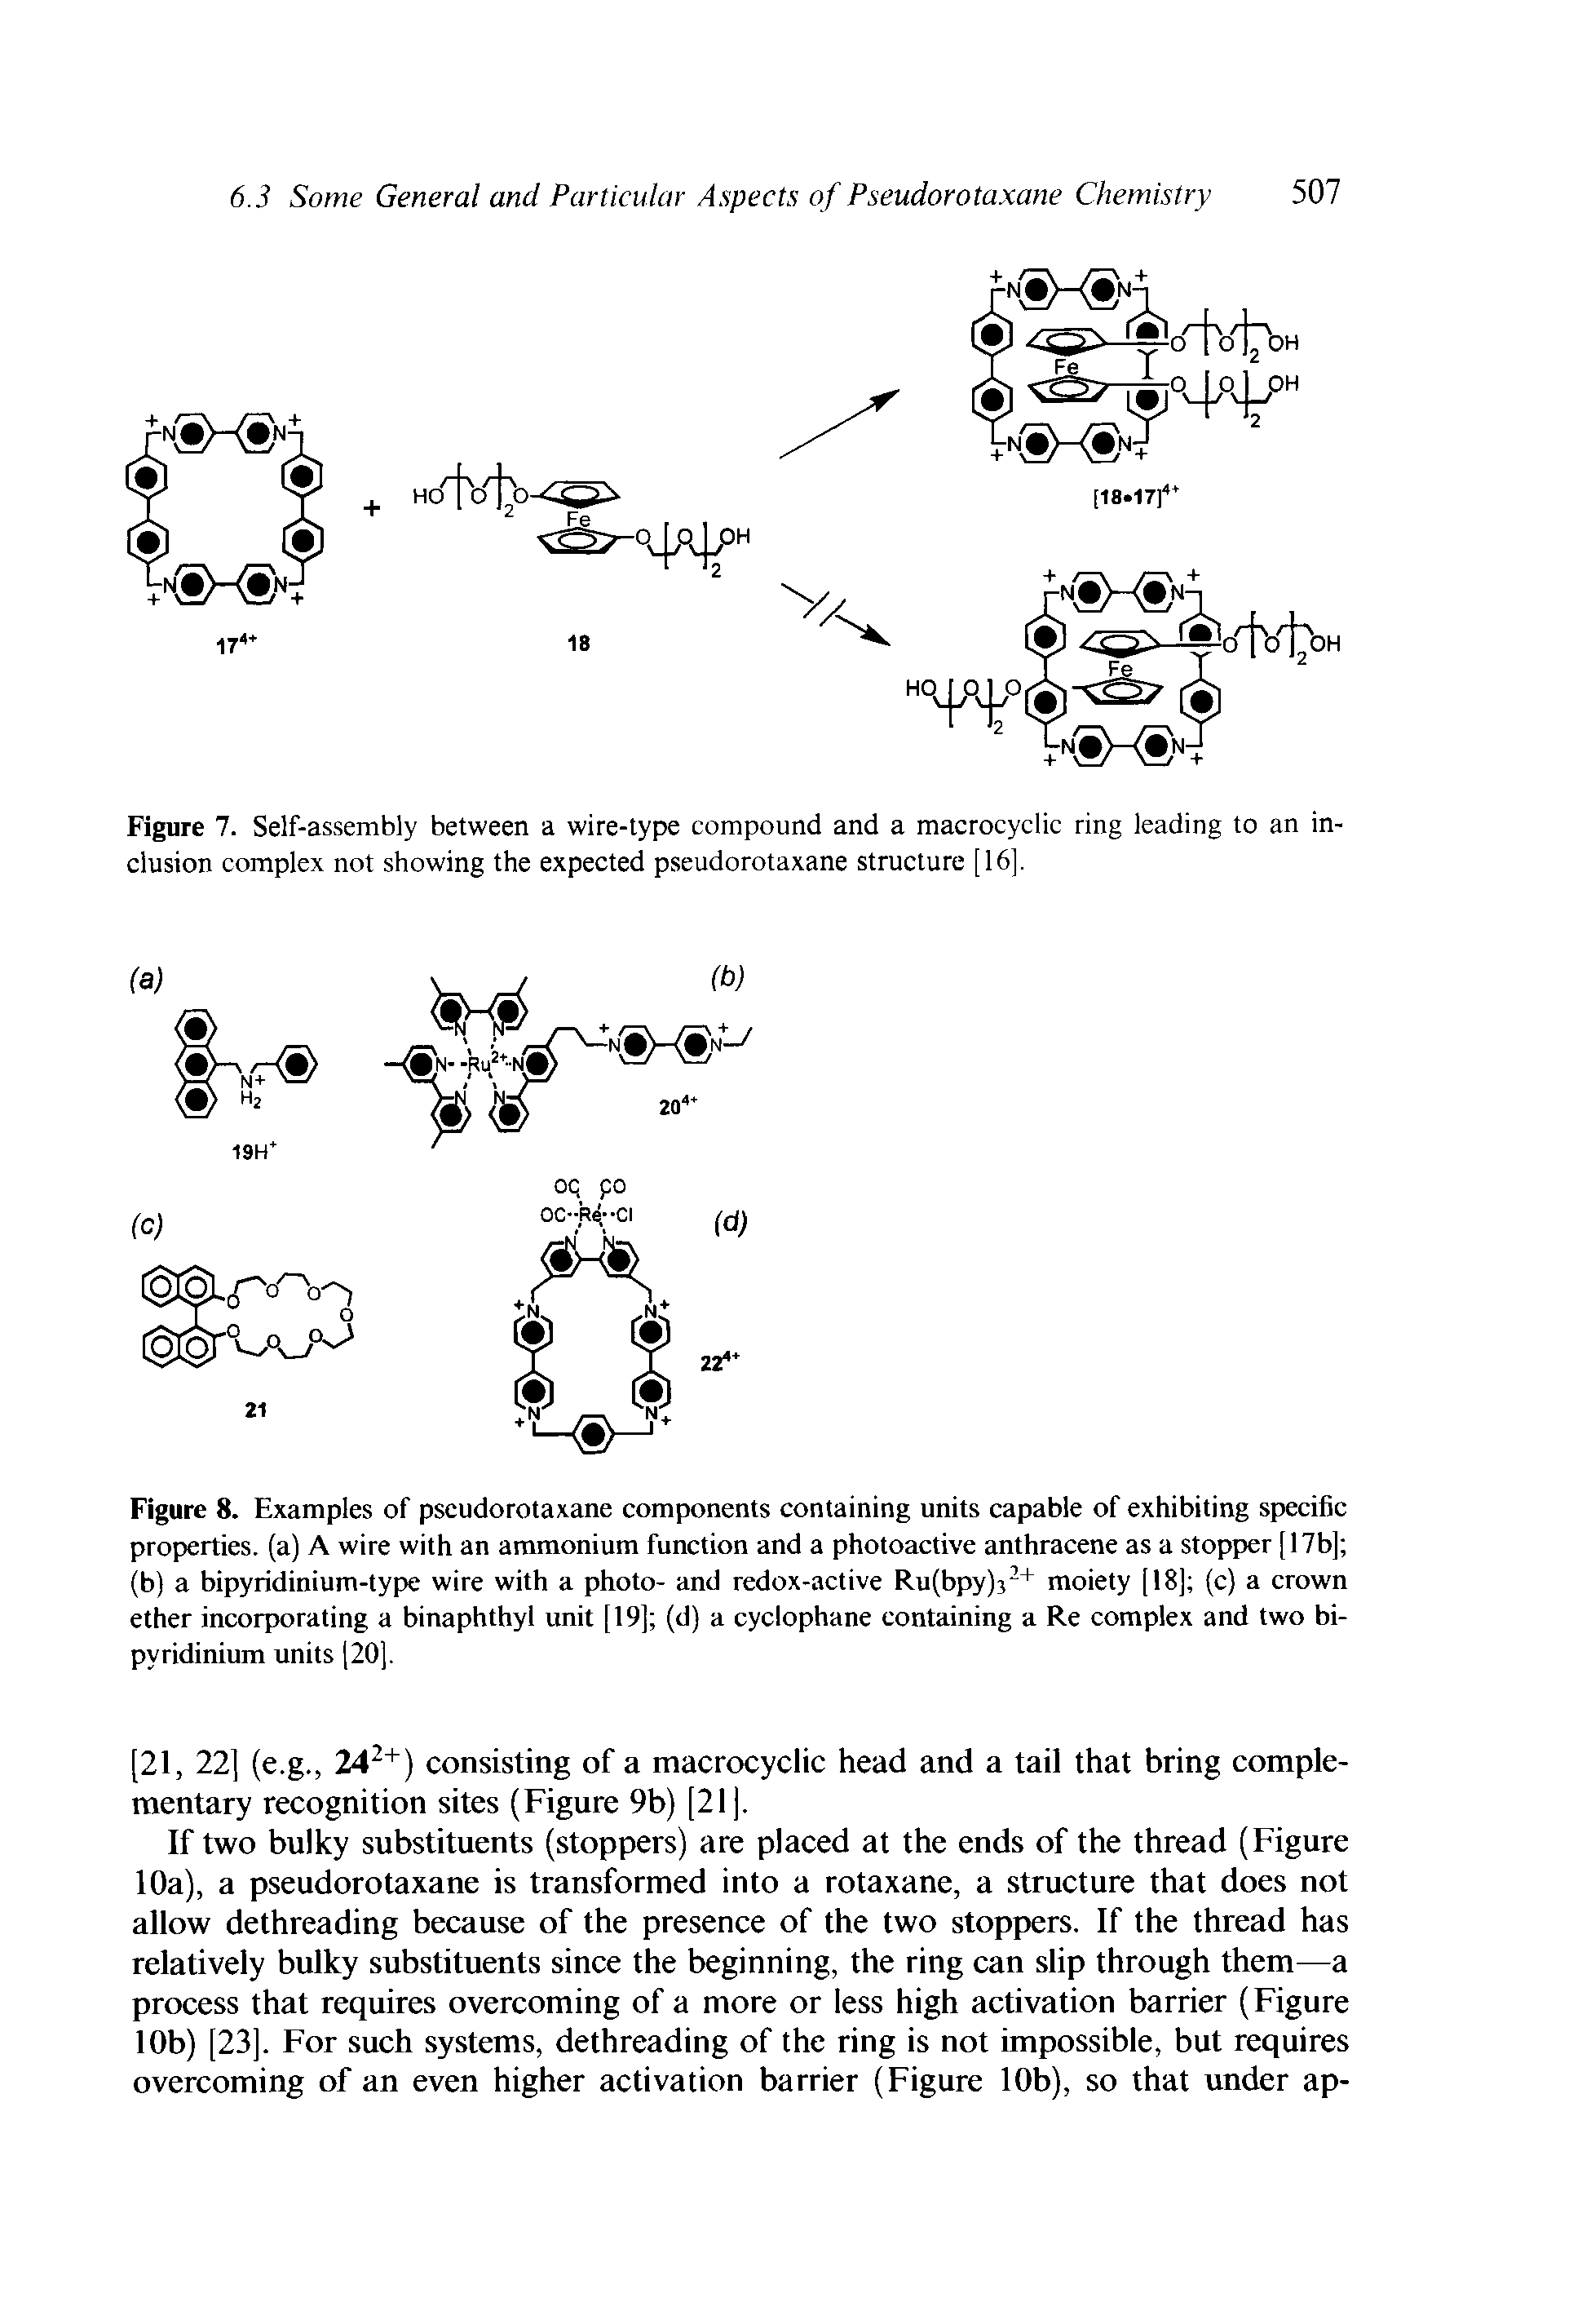 Figure 7. Self-assembly between a wire-type compound and a macrocyclic ring leading to an inclusion complex not showing the expected pseudorotaxane structure [16],...